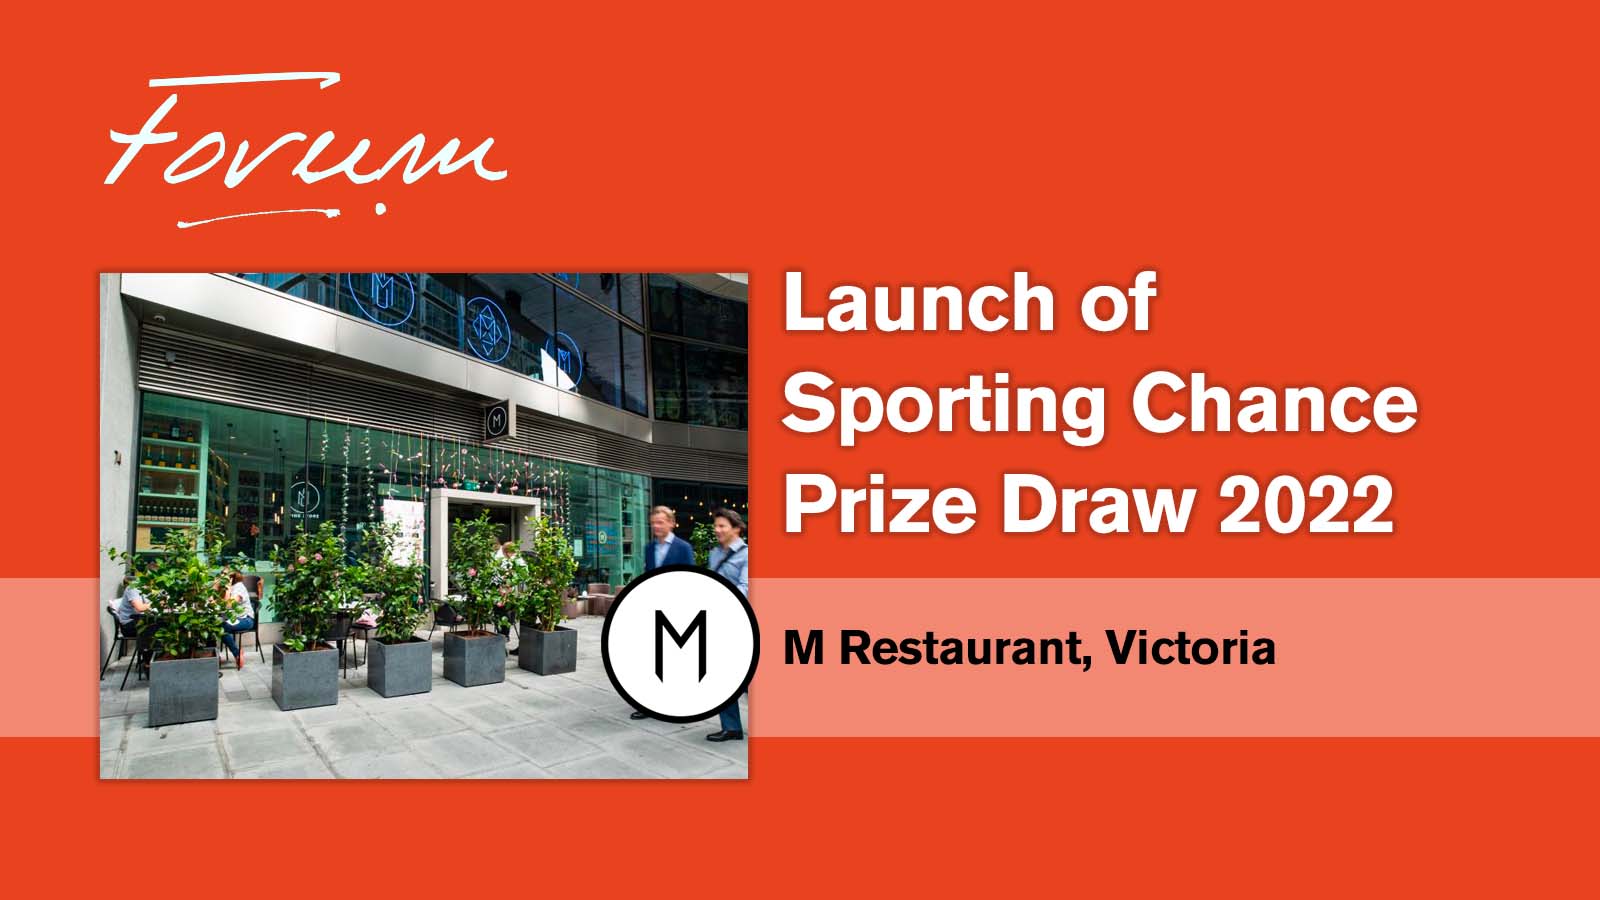 Sporting Chance Prize Draw launch